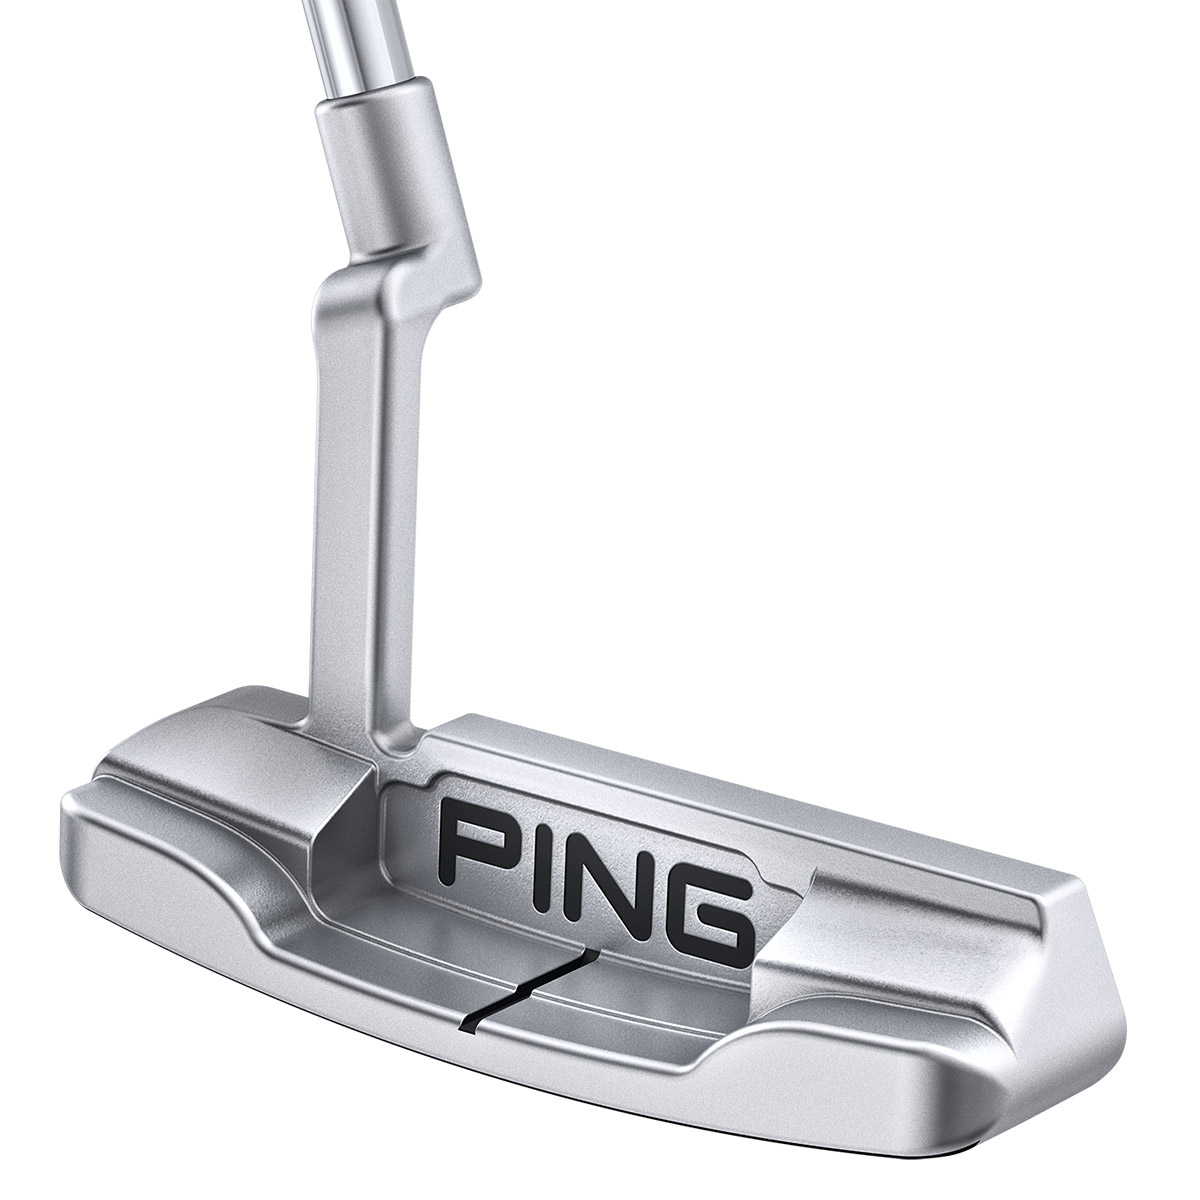 PING Sigma 2 Anser Platinum Putter from american golf